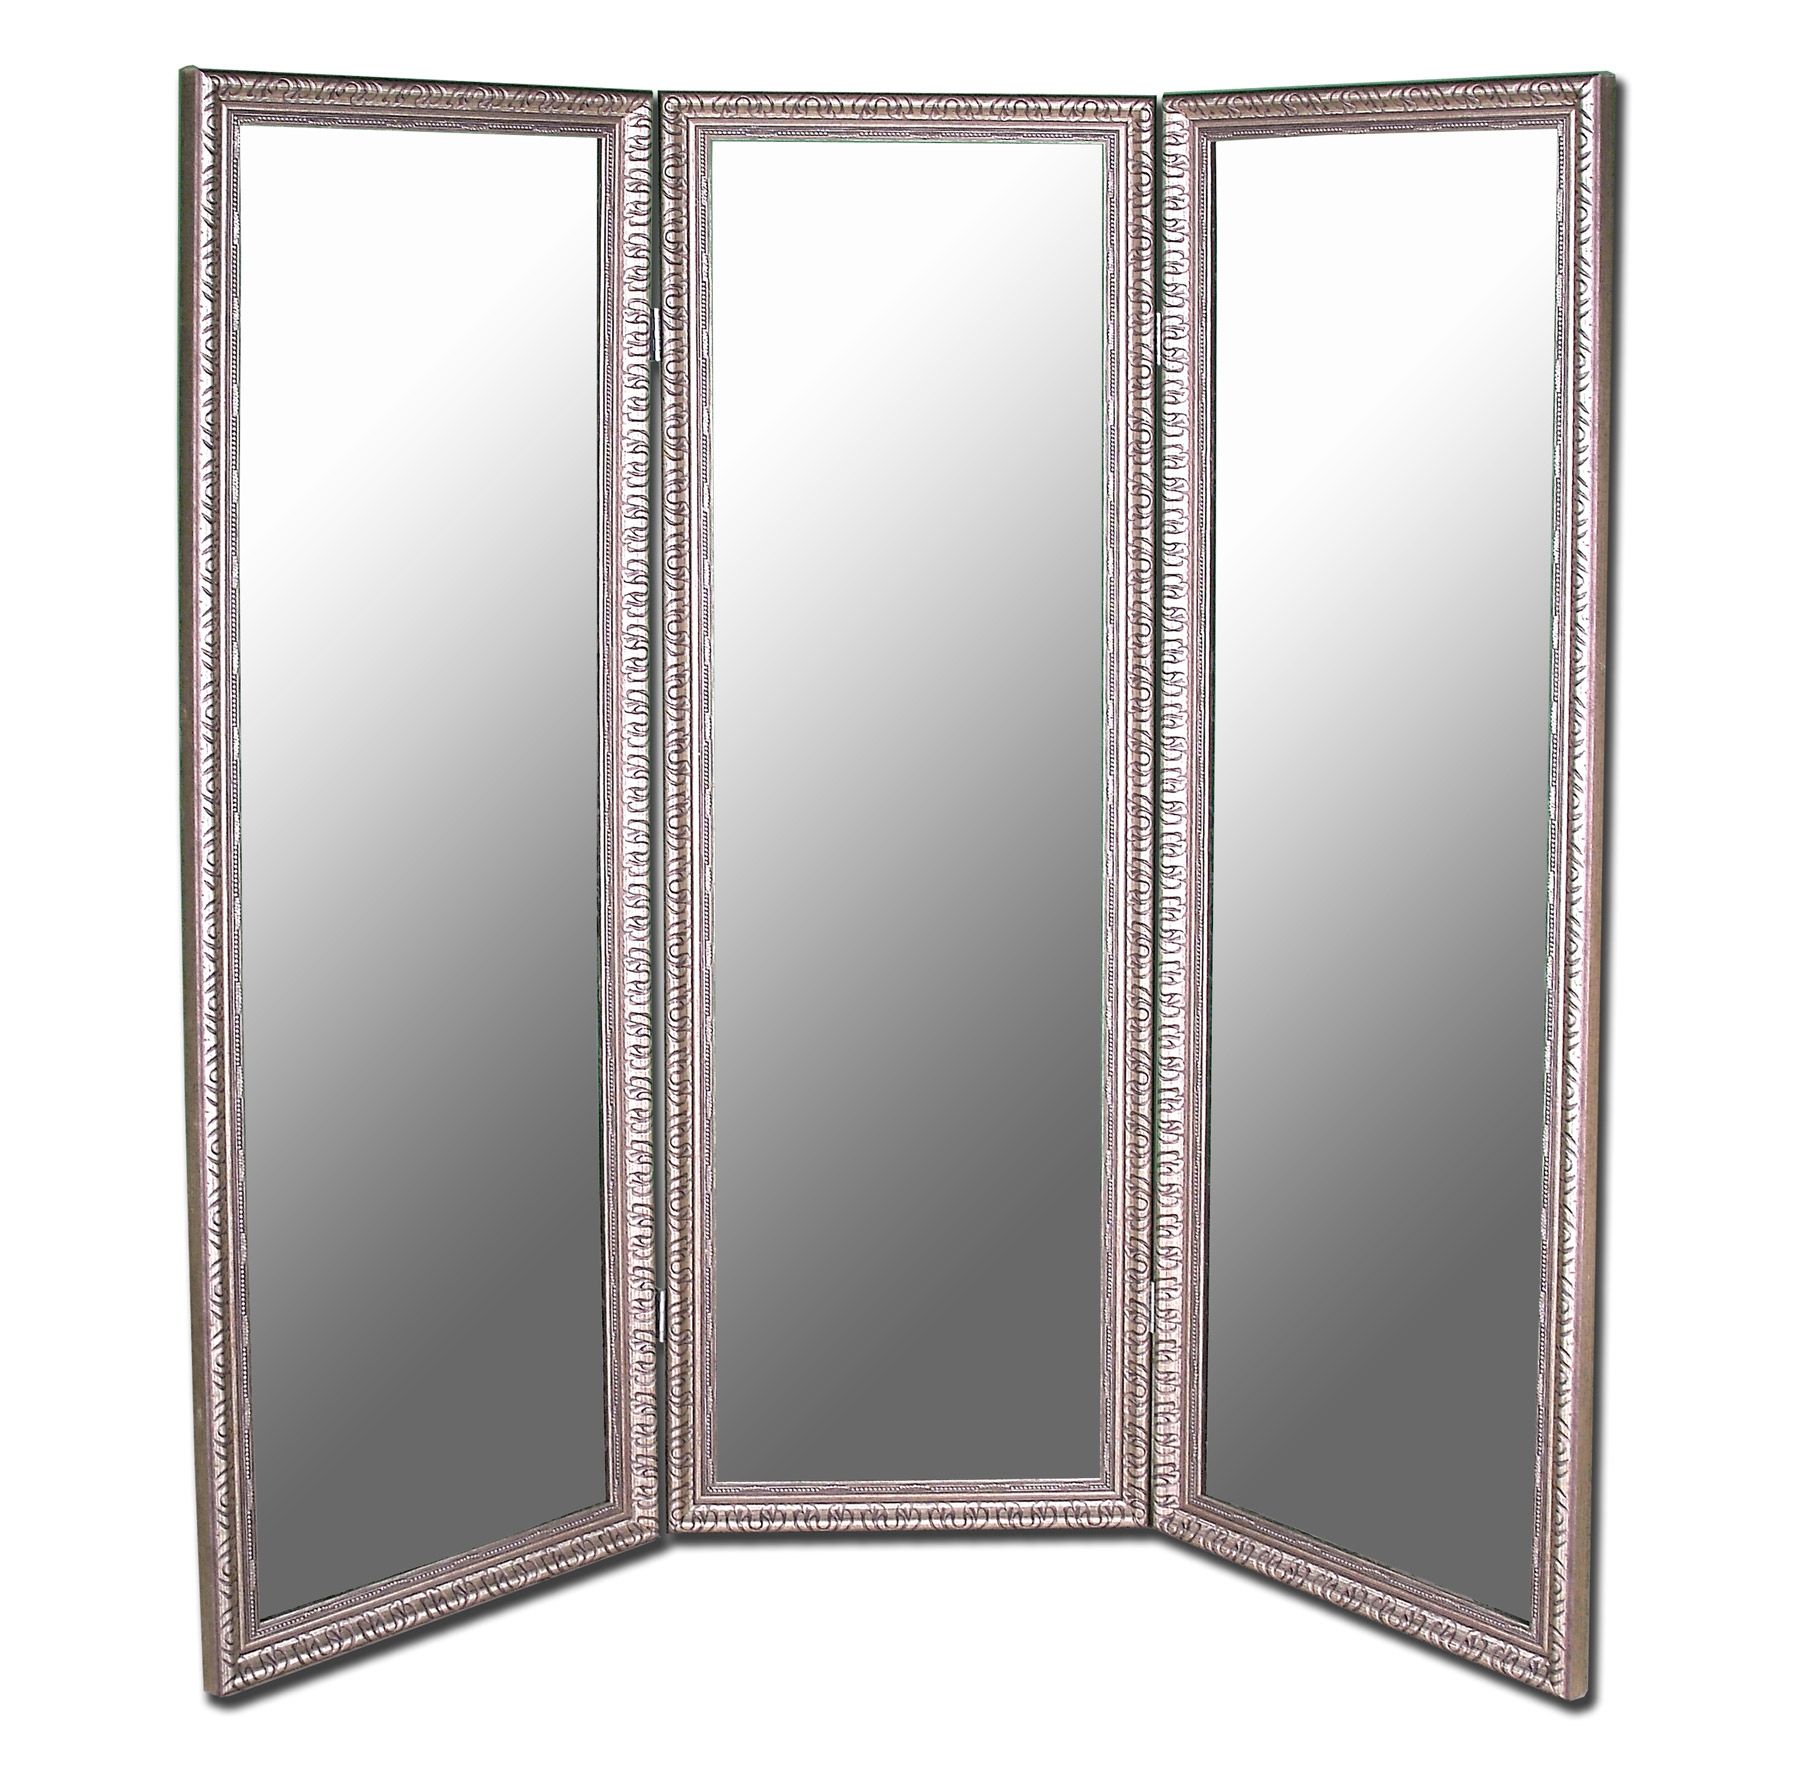 Hitchcock Butterfield 6702 Pmrd Antique Silver 3 Panel Mirror In Linen Fold Silver Wall Mirrors (View 11 of 15)